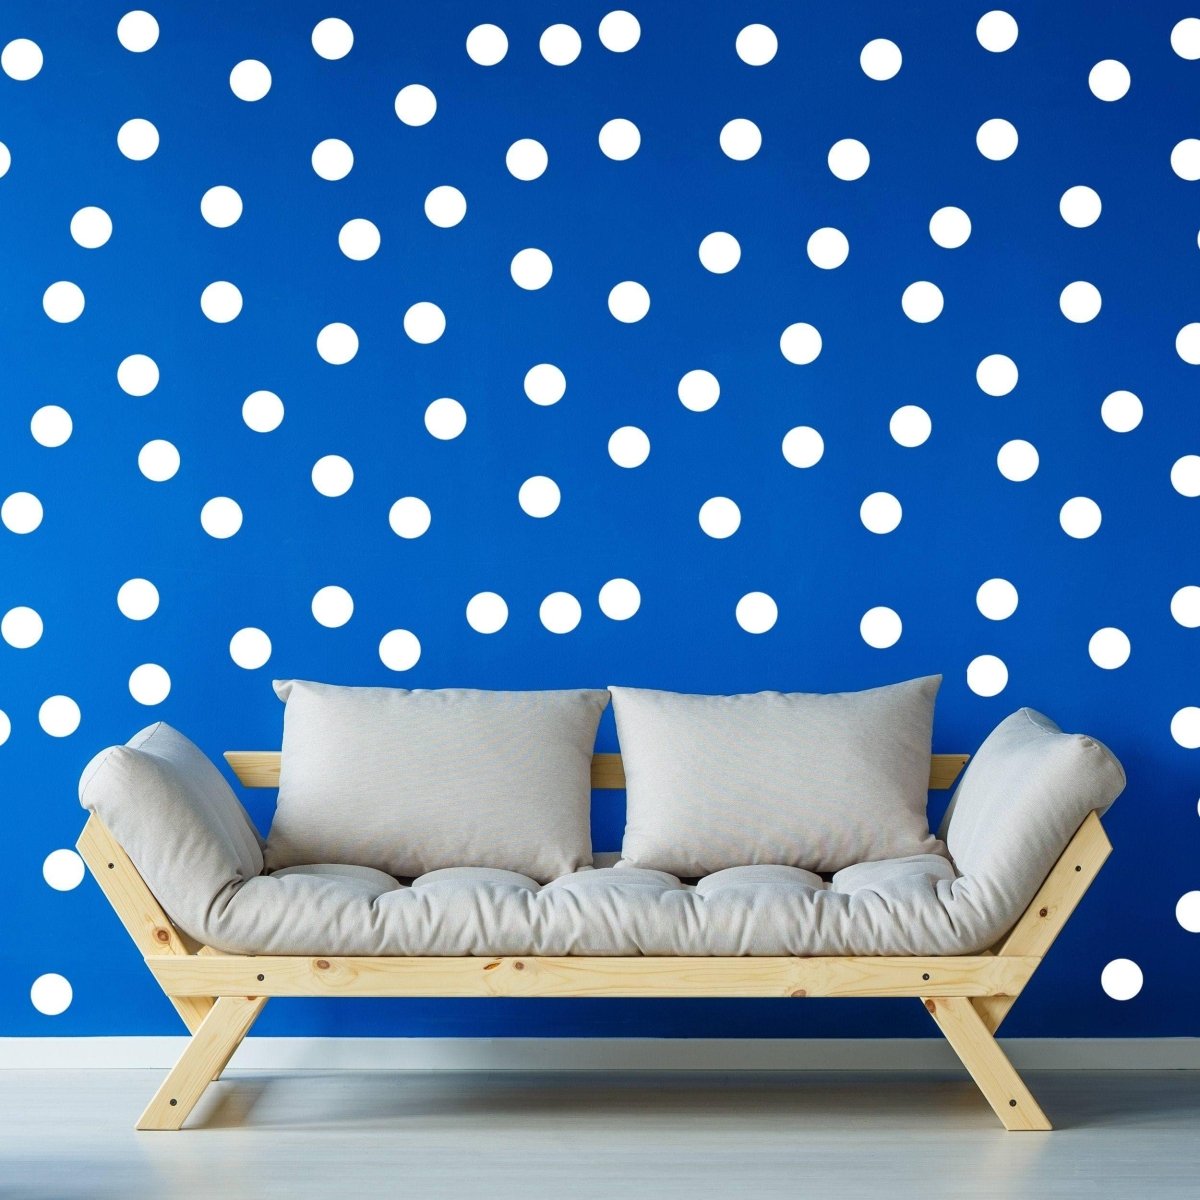 2-Inch Round Dot Circle Wall Stickers - Colorful Adhesive Decals for Creative Spaces - Decords